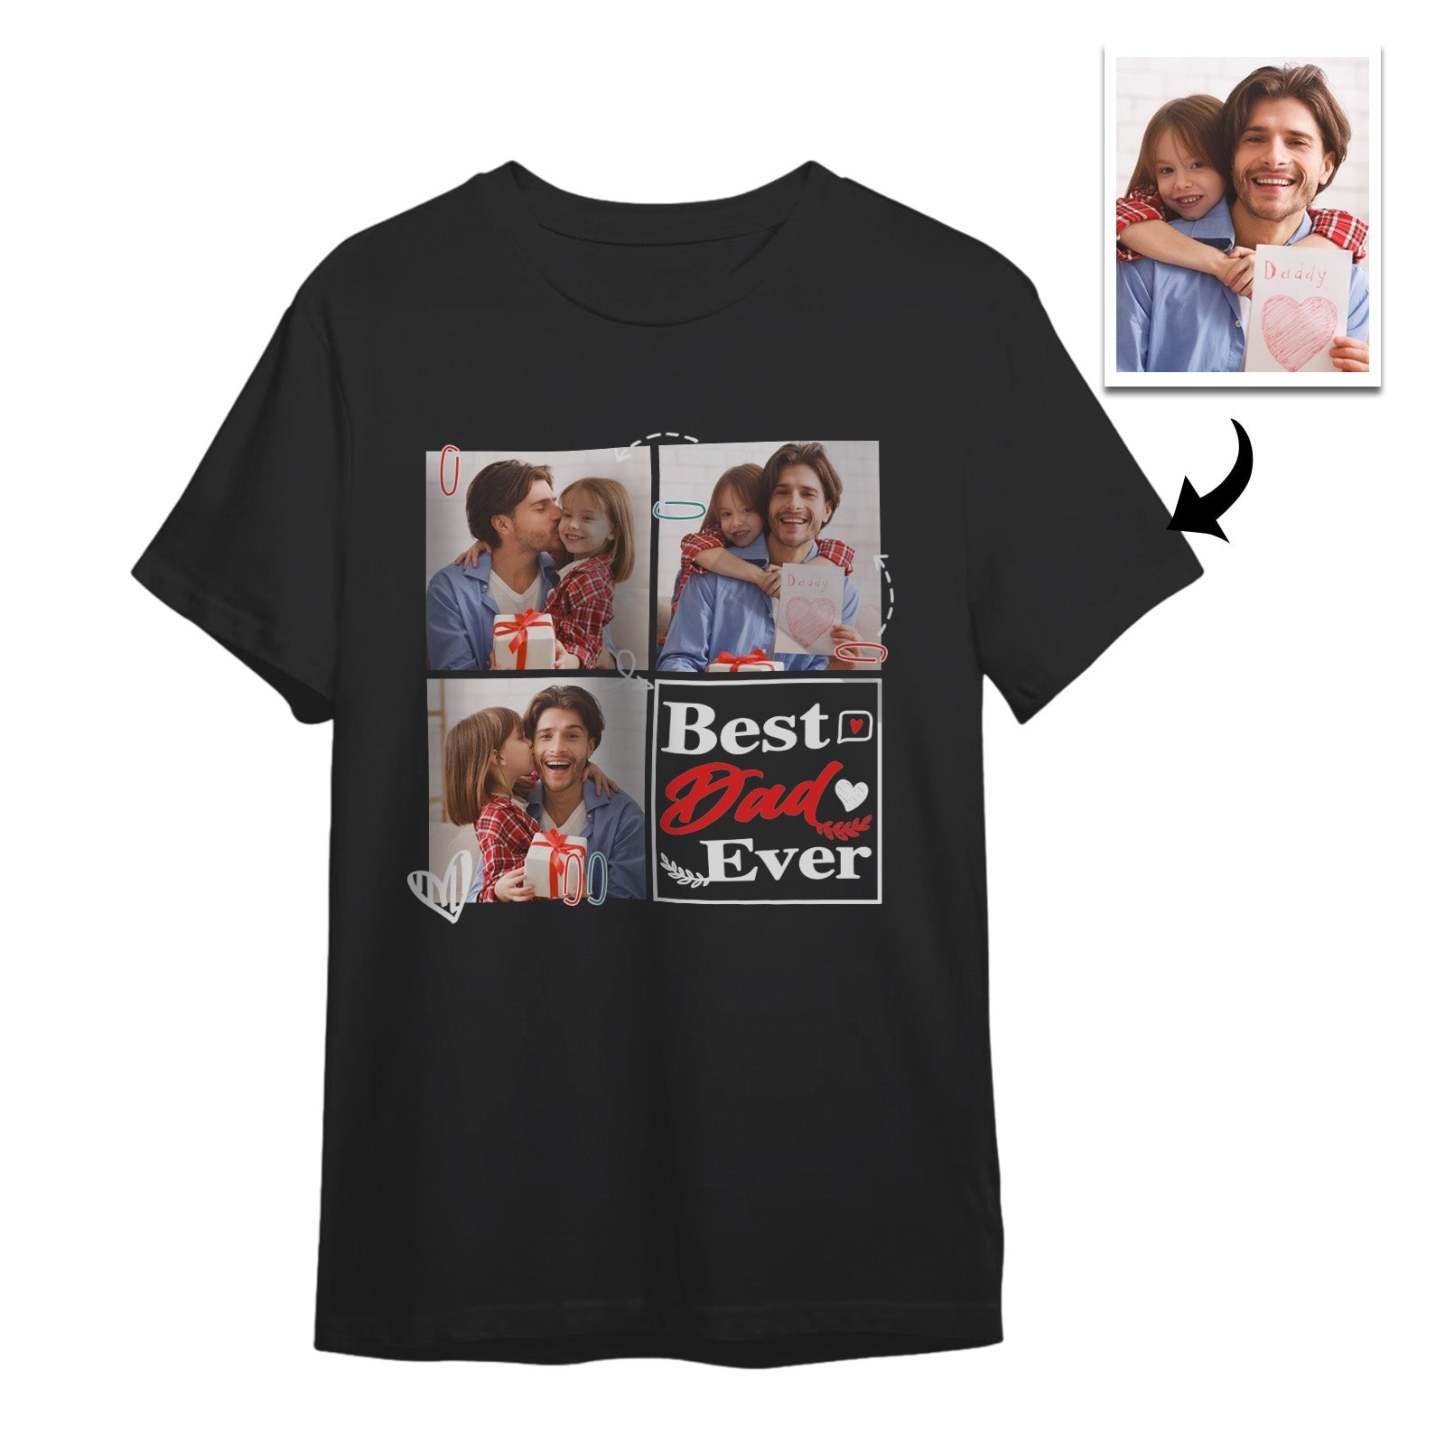 Custom 3 Photos T-Shirt Personalized Photo Men's T-Shirt Best Dad Ever Father's Day Gift Family T-Shirt